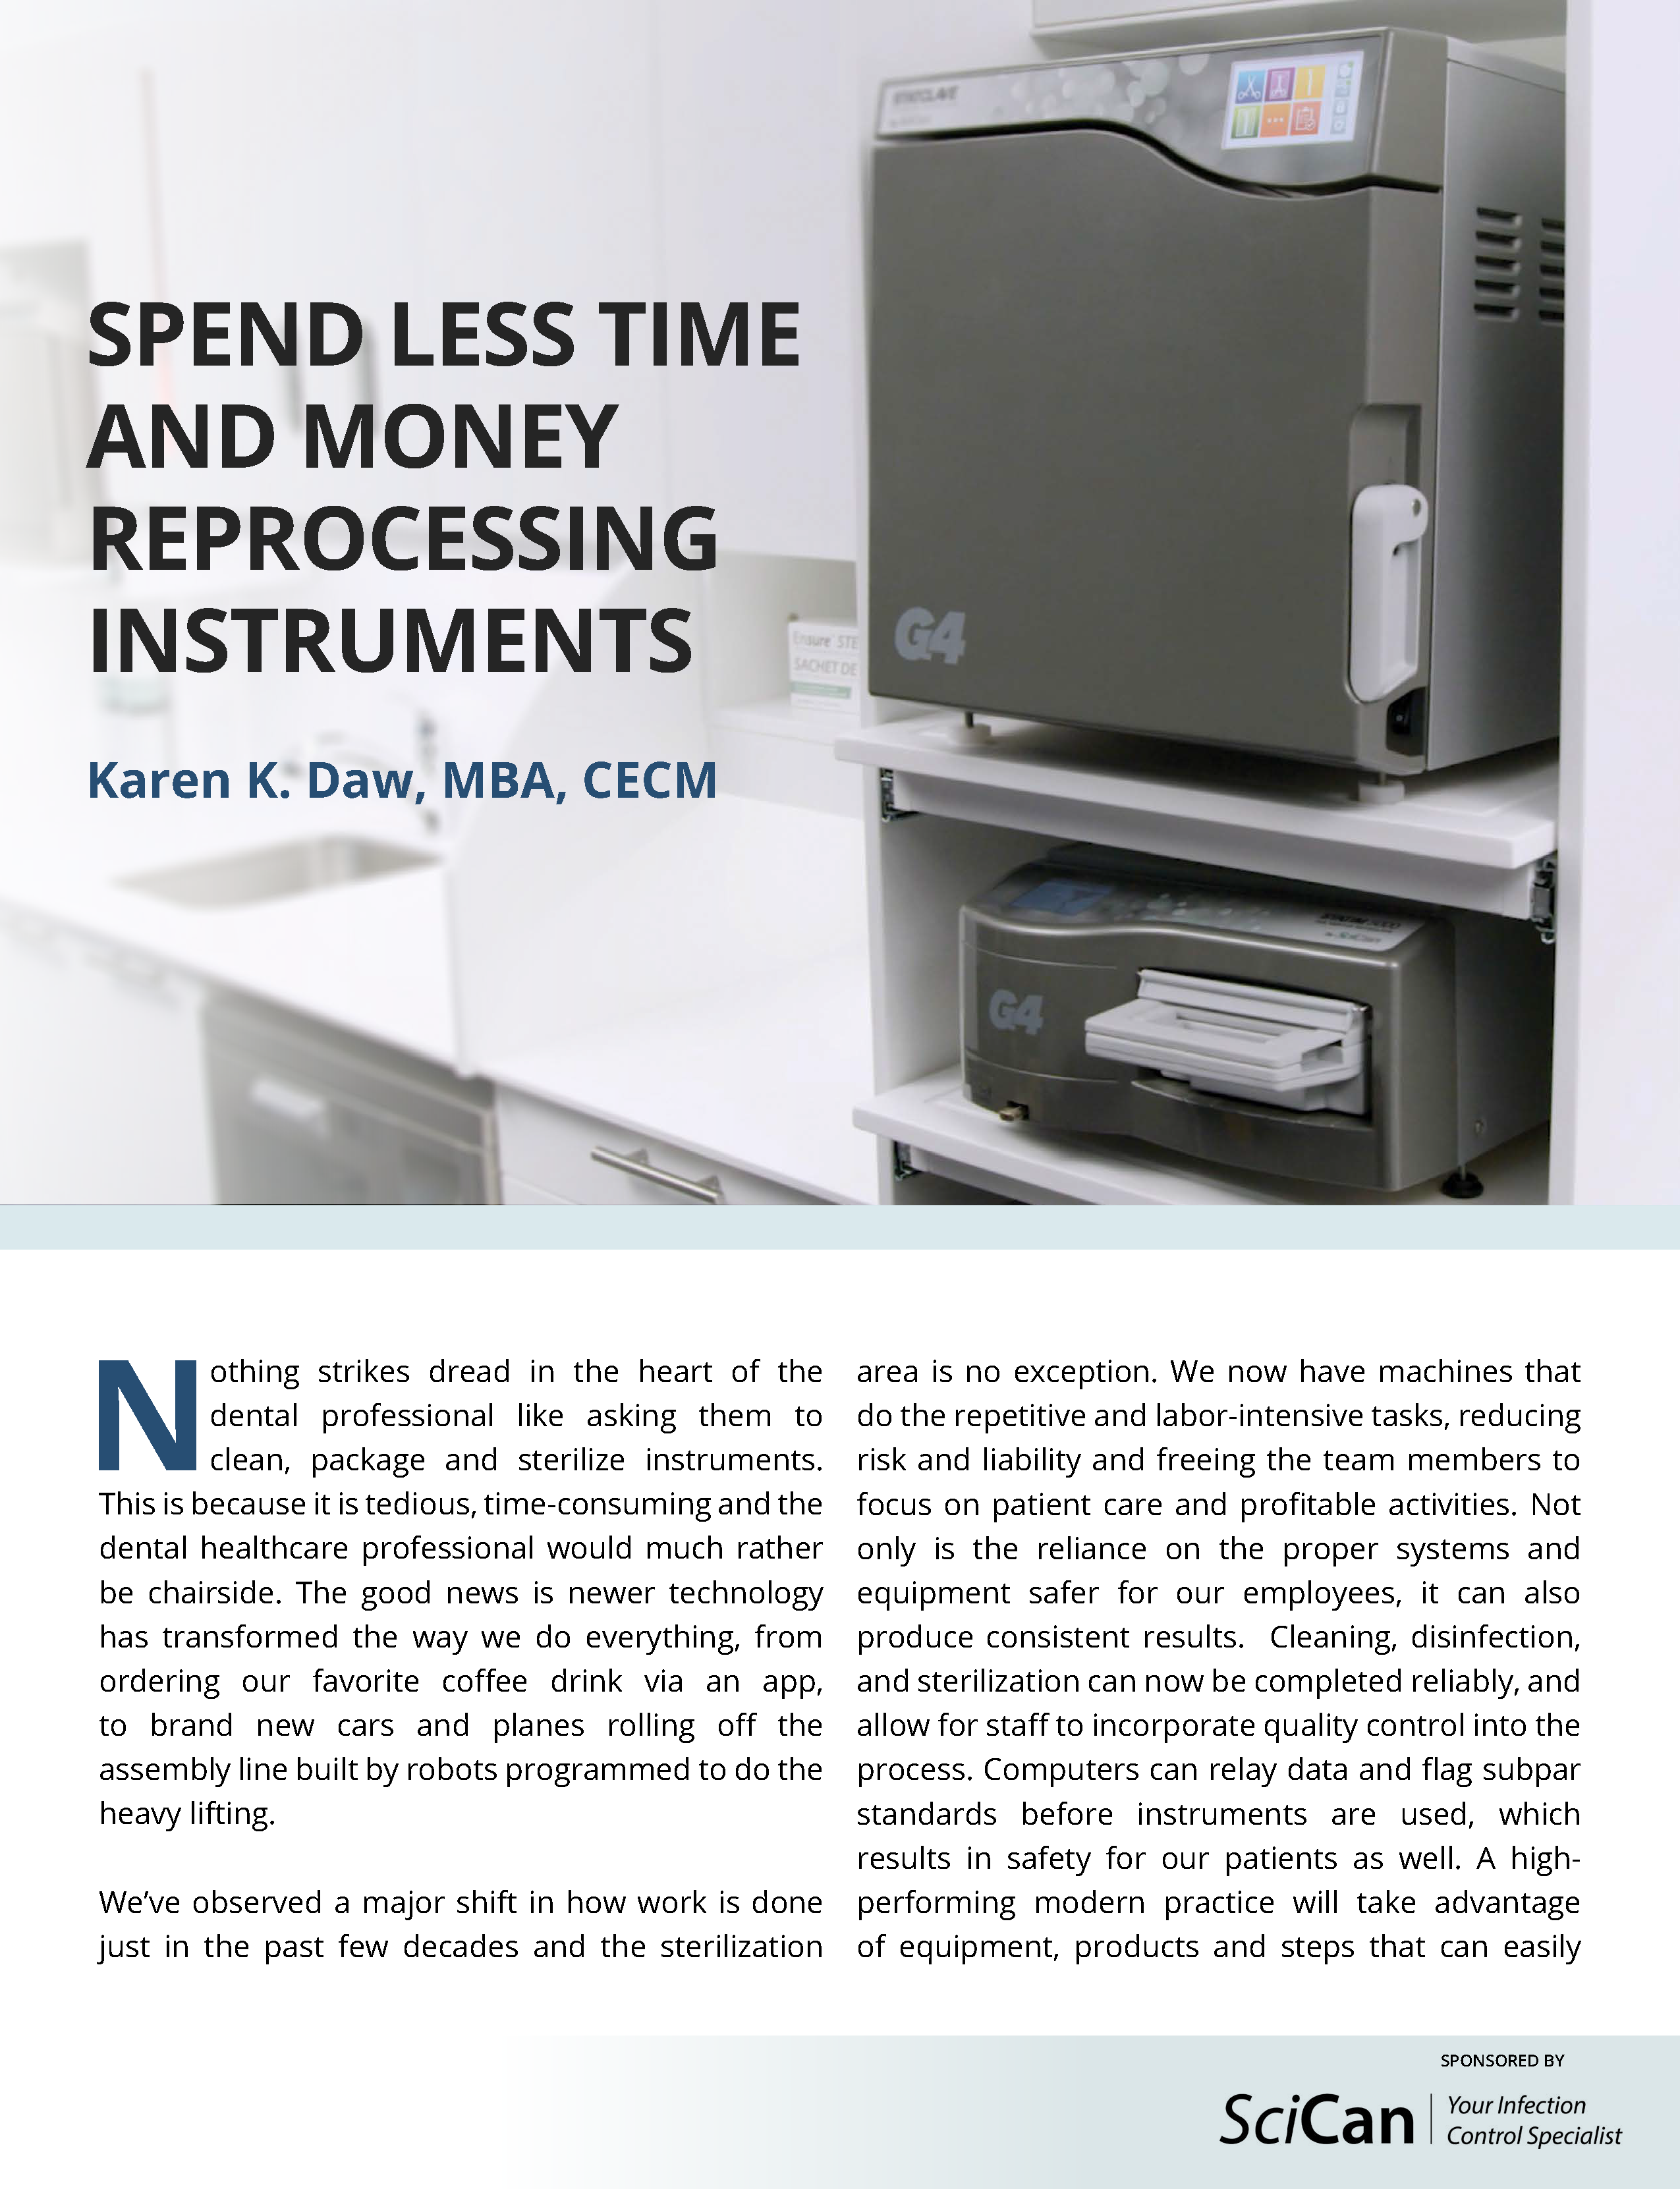 Free E-Book: Spend Less Time and Money Reprocessing Instruments